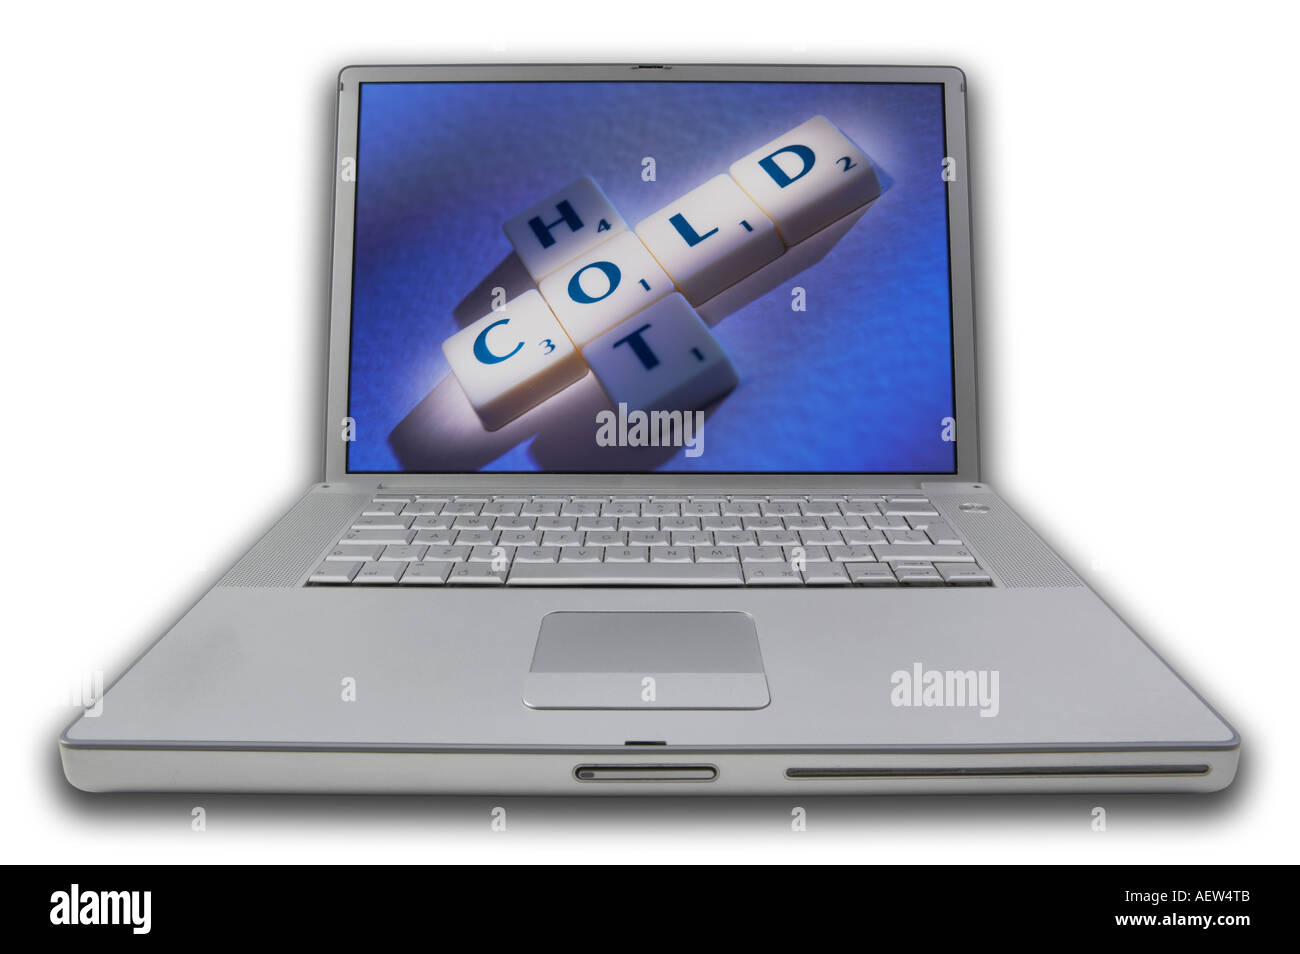 LAP TOP COMPUTER WITH SCRABBLE LETTERS ON SCREEN SPELLING WORDS HOT COLD Stock Photo